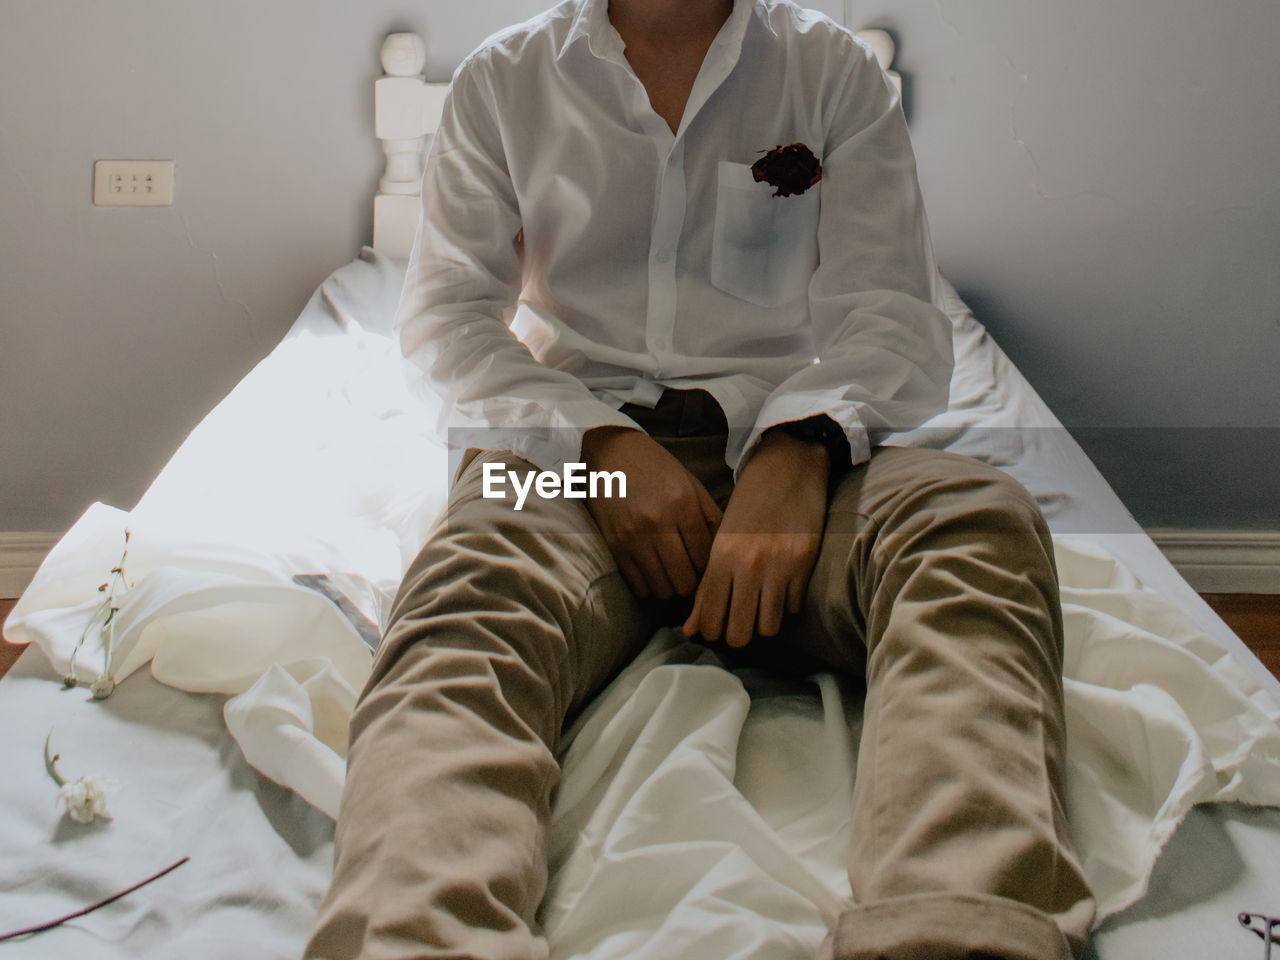 A person in white long sleeves with a rose on its pocket and khaki pants sitting in bed, alone in an 